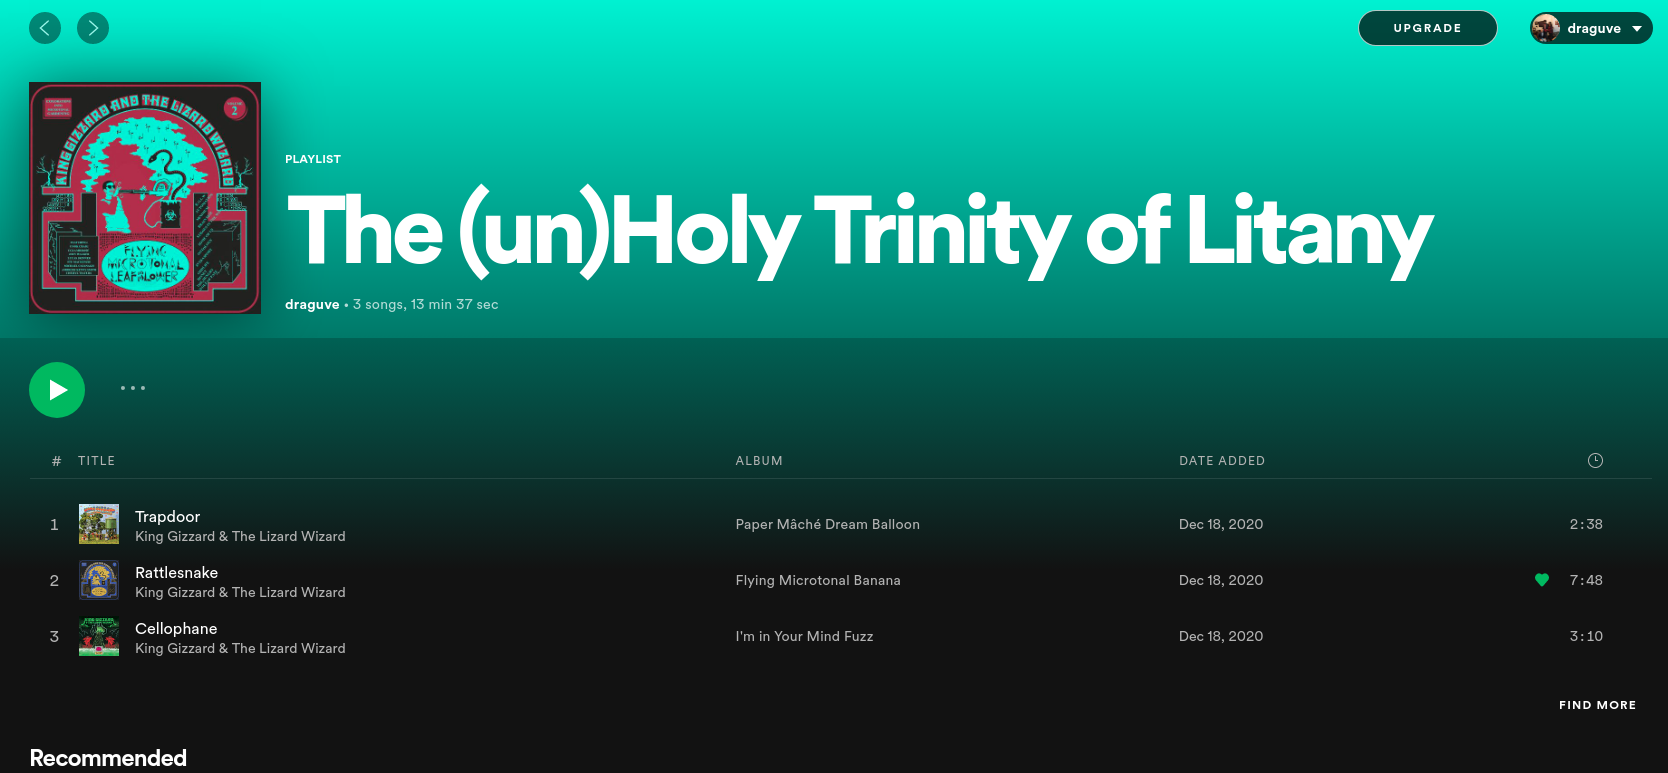 On Spotify Playlist Images